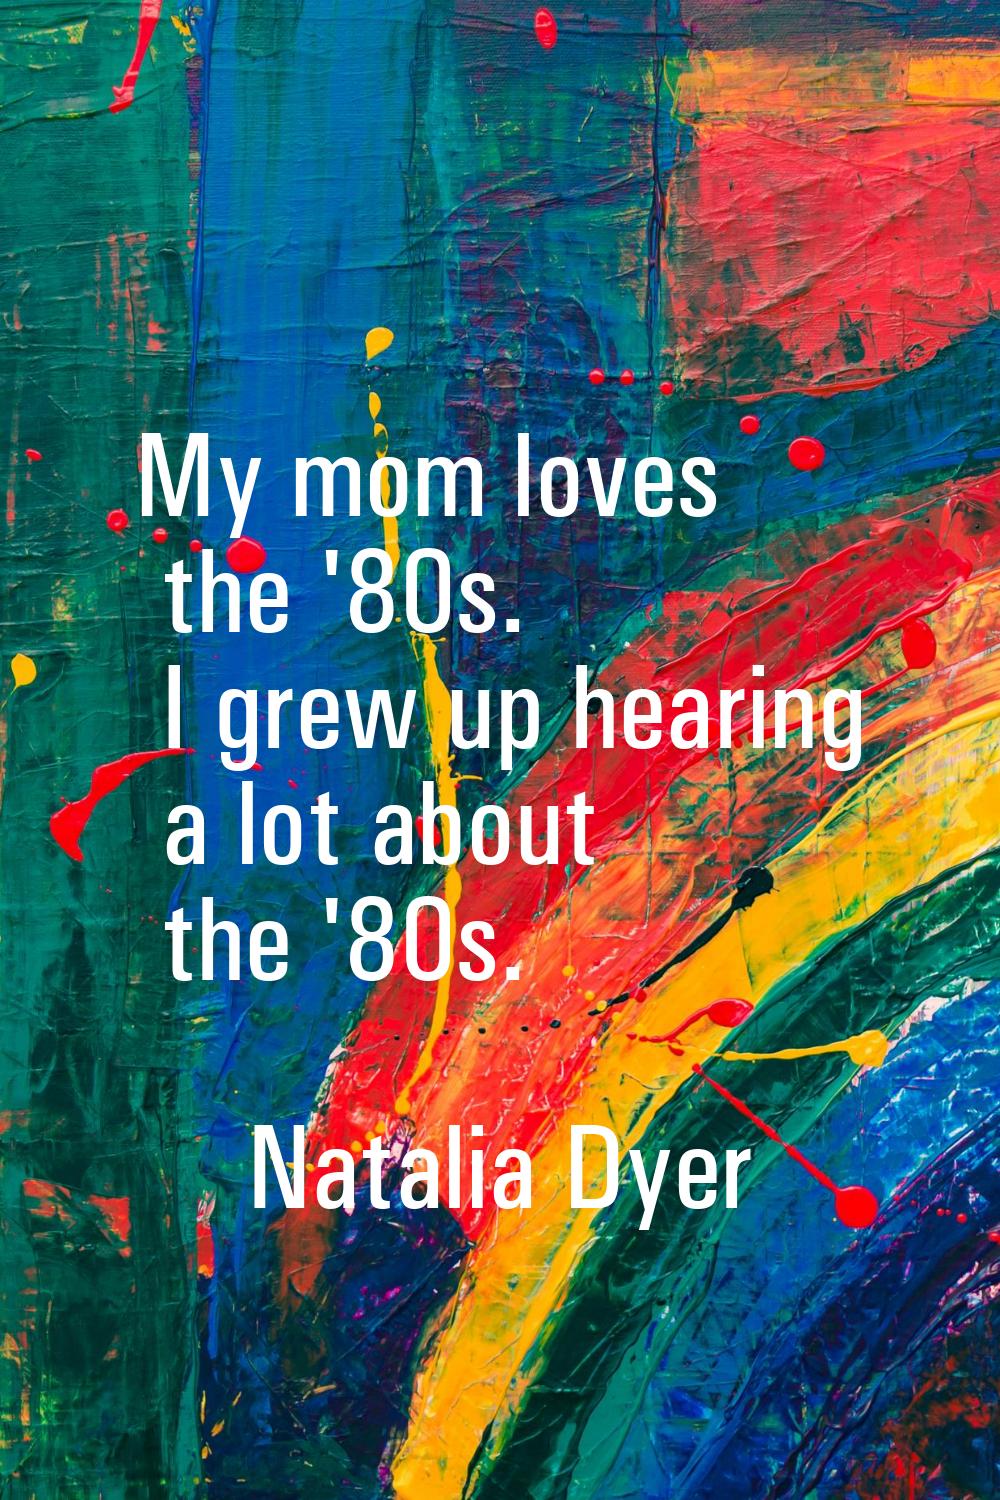 My mom loves the '80s. I grew up hearing a lot about the '80s.